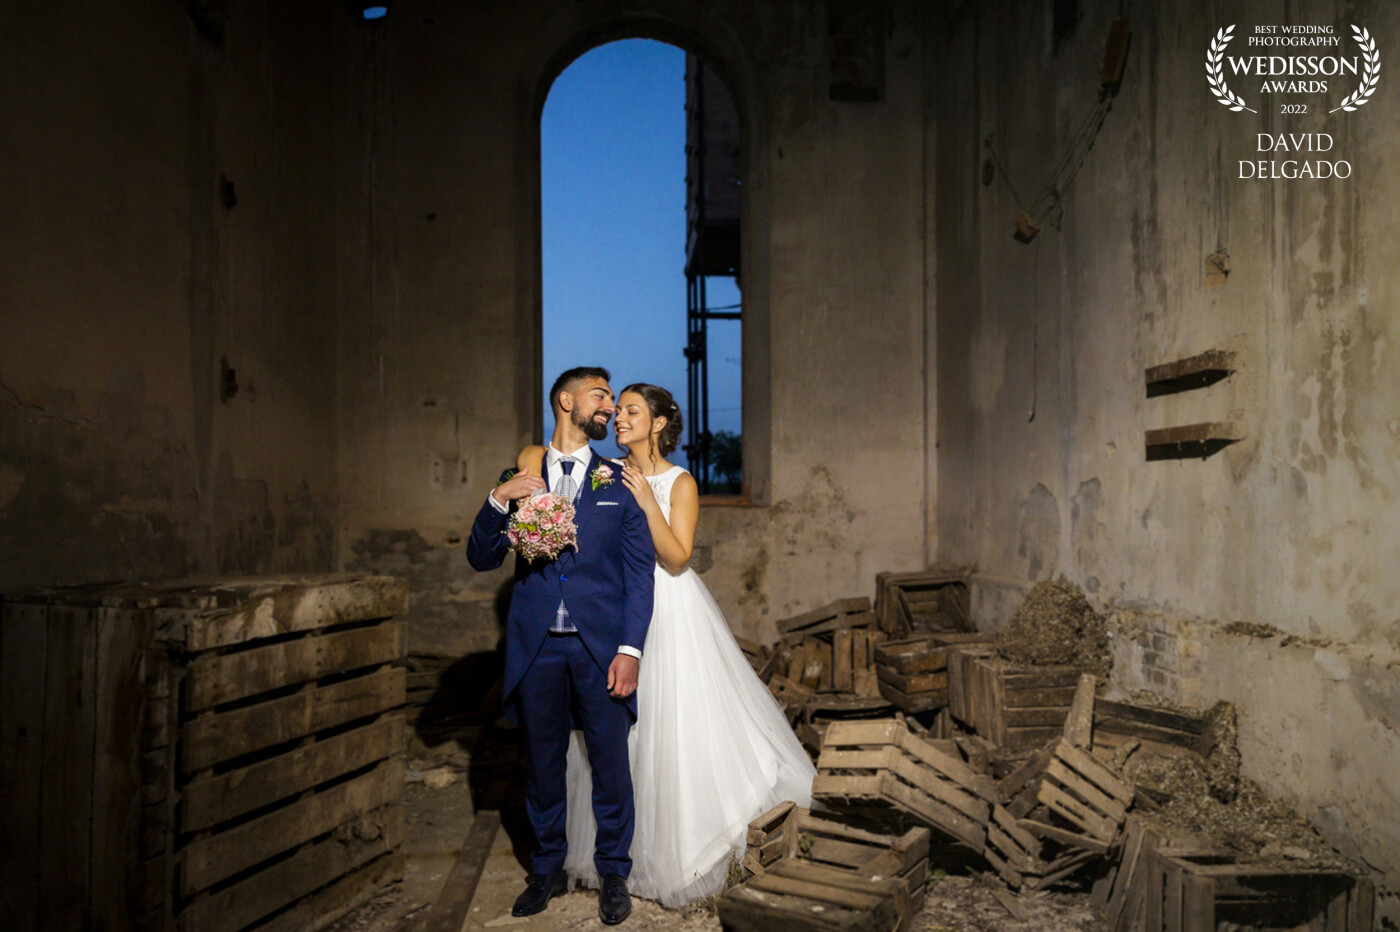 La Sucrera - Beautiful and different wedding report we did with this beautiful couple in this abandoned factory in a small town in Lleida. Thank you very much guys for being as daring as you were!